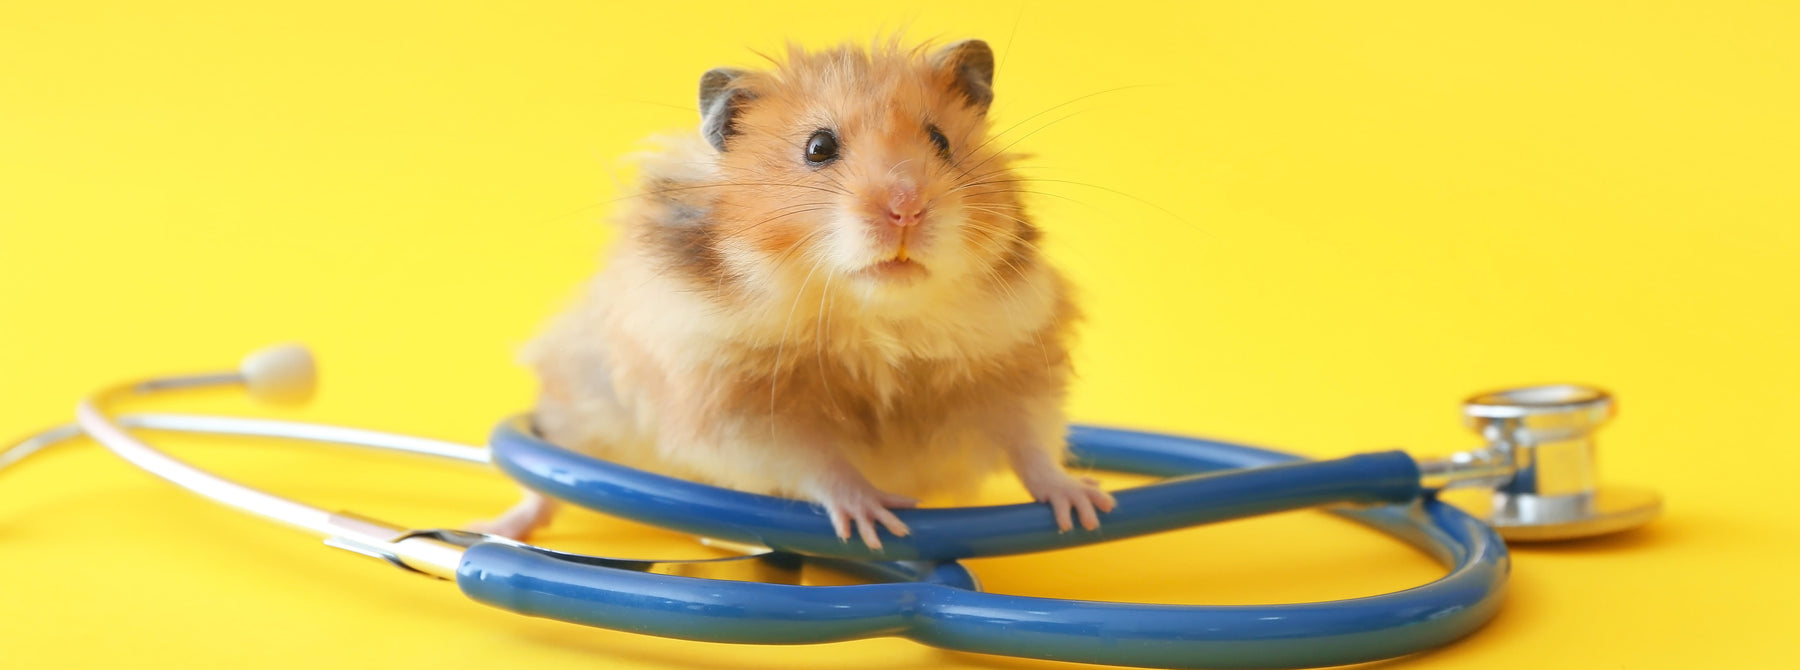 Small pet hamster standing on a stethoscope